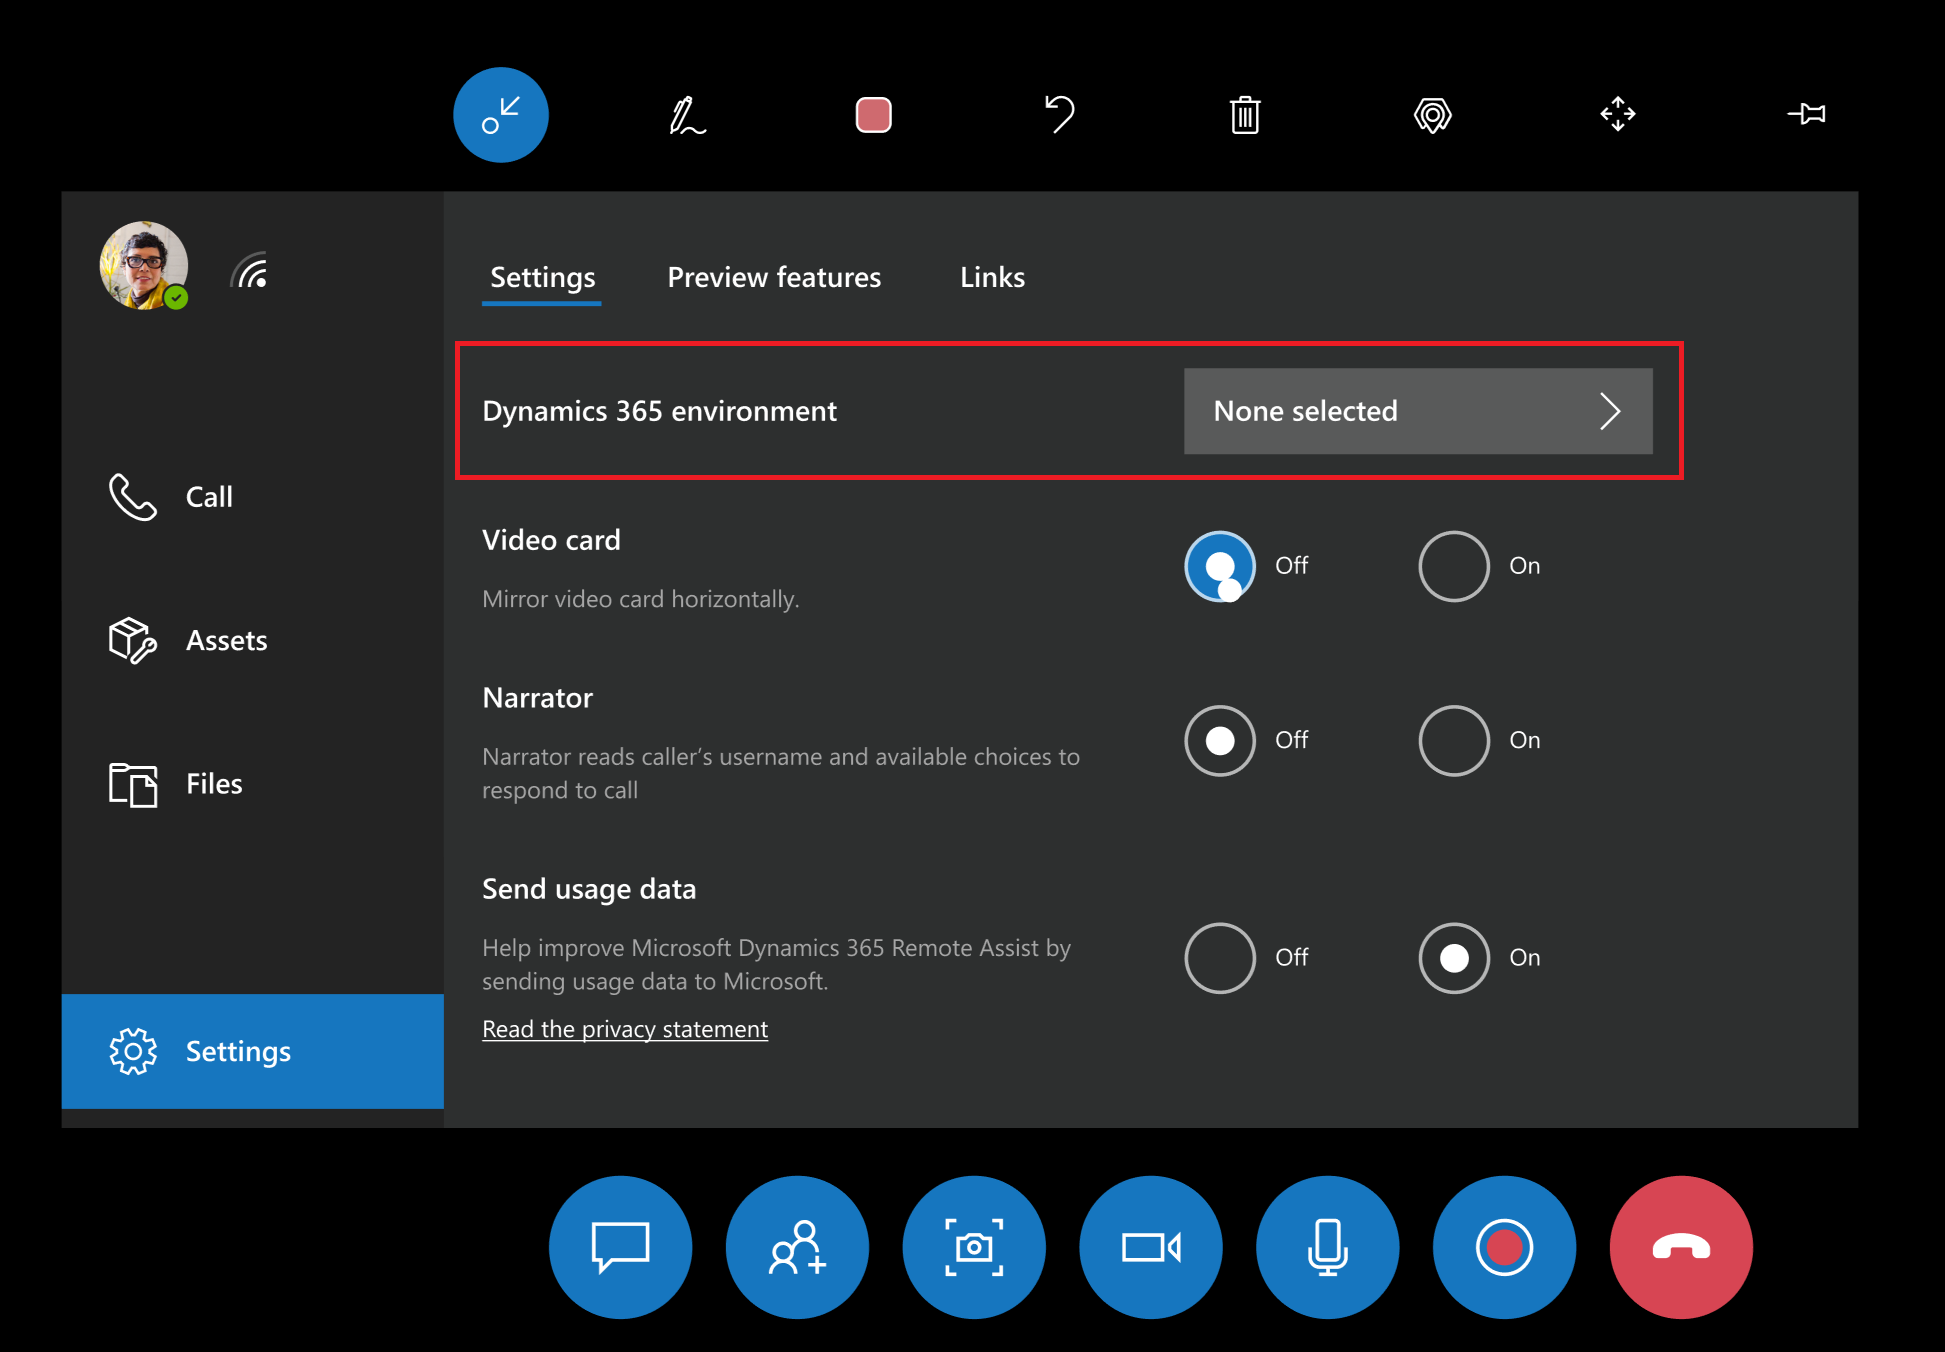 Remote Assist settings in the HoloLens.